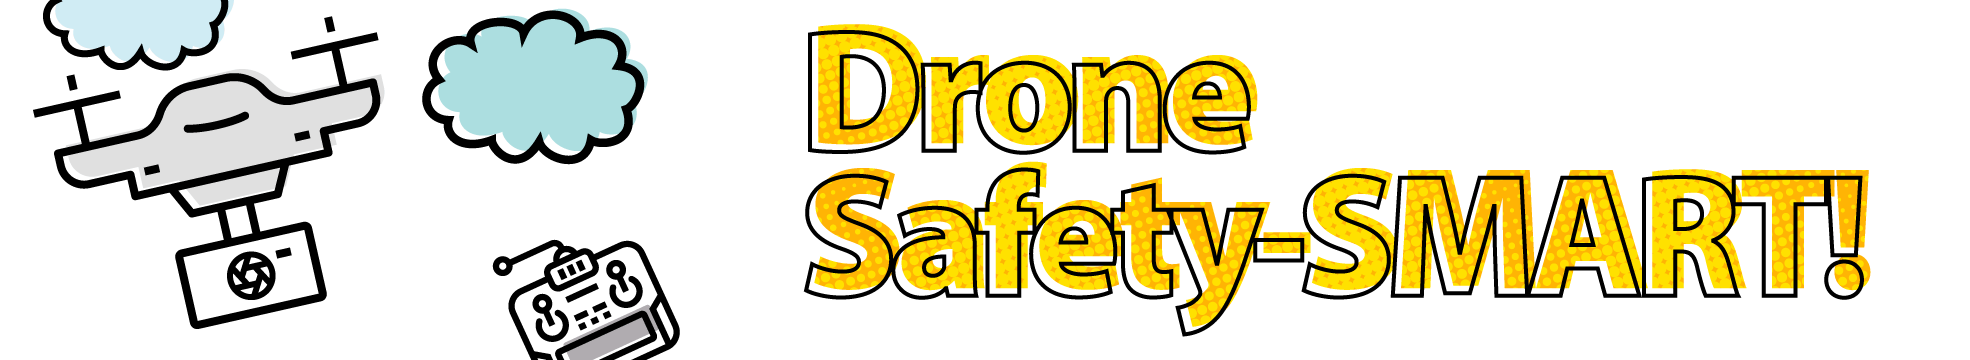 Drone Safety SMART illustrated drone and controller icons